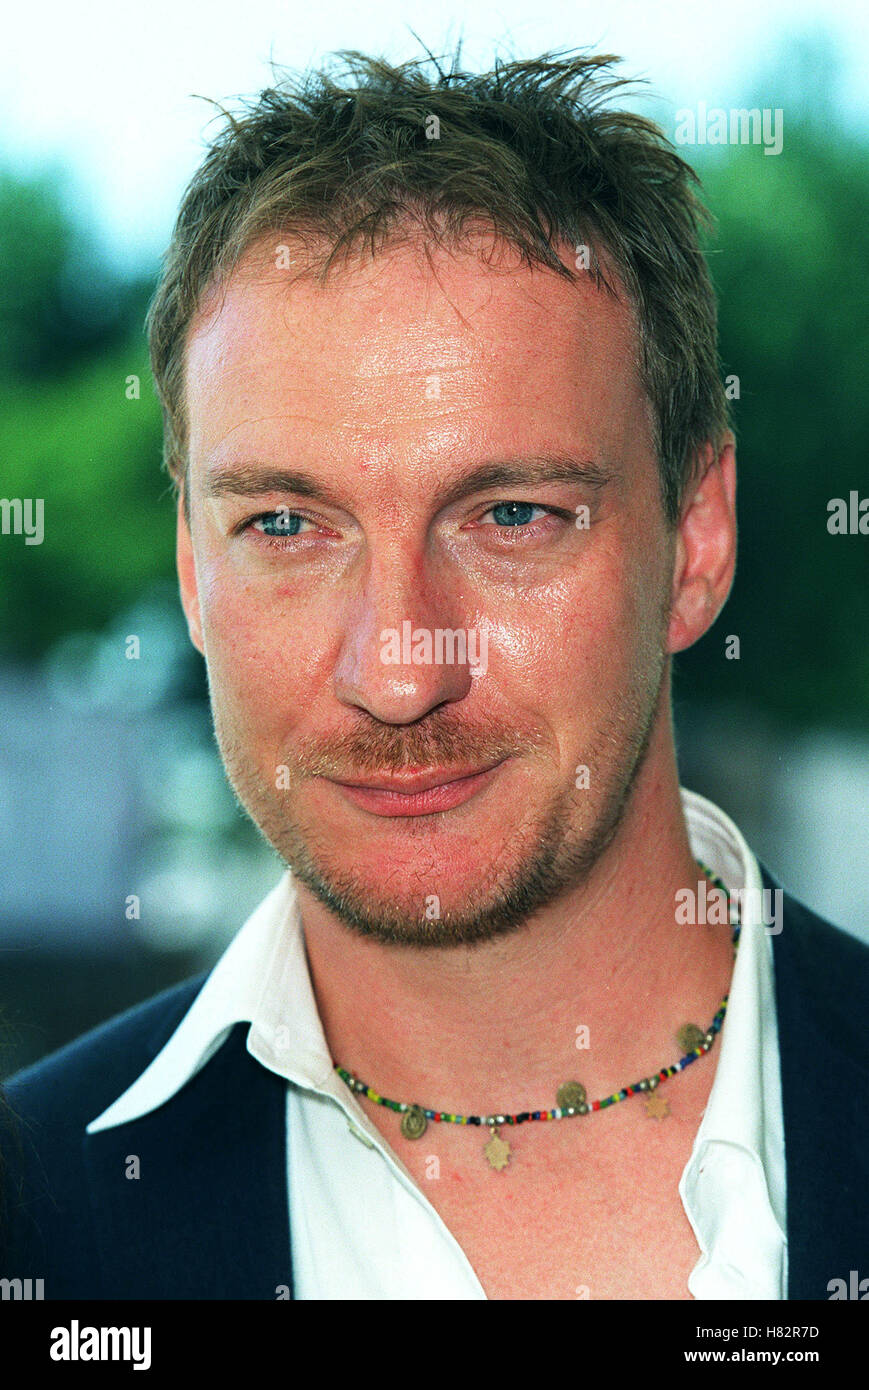 DAVID THEWLIS 'ME WITHOUT YOU' FILM PREMIERE VENICE FILM FESTIVAL 2001 ITALY 03 September 2001 Stock Photo